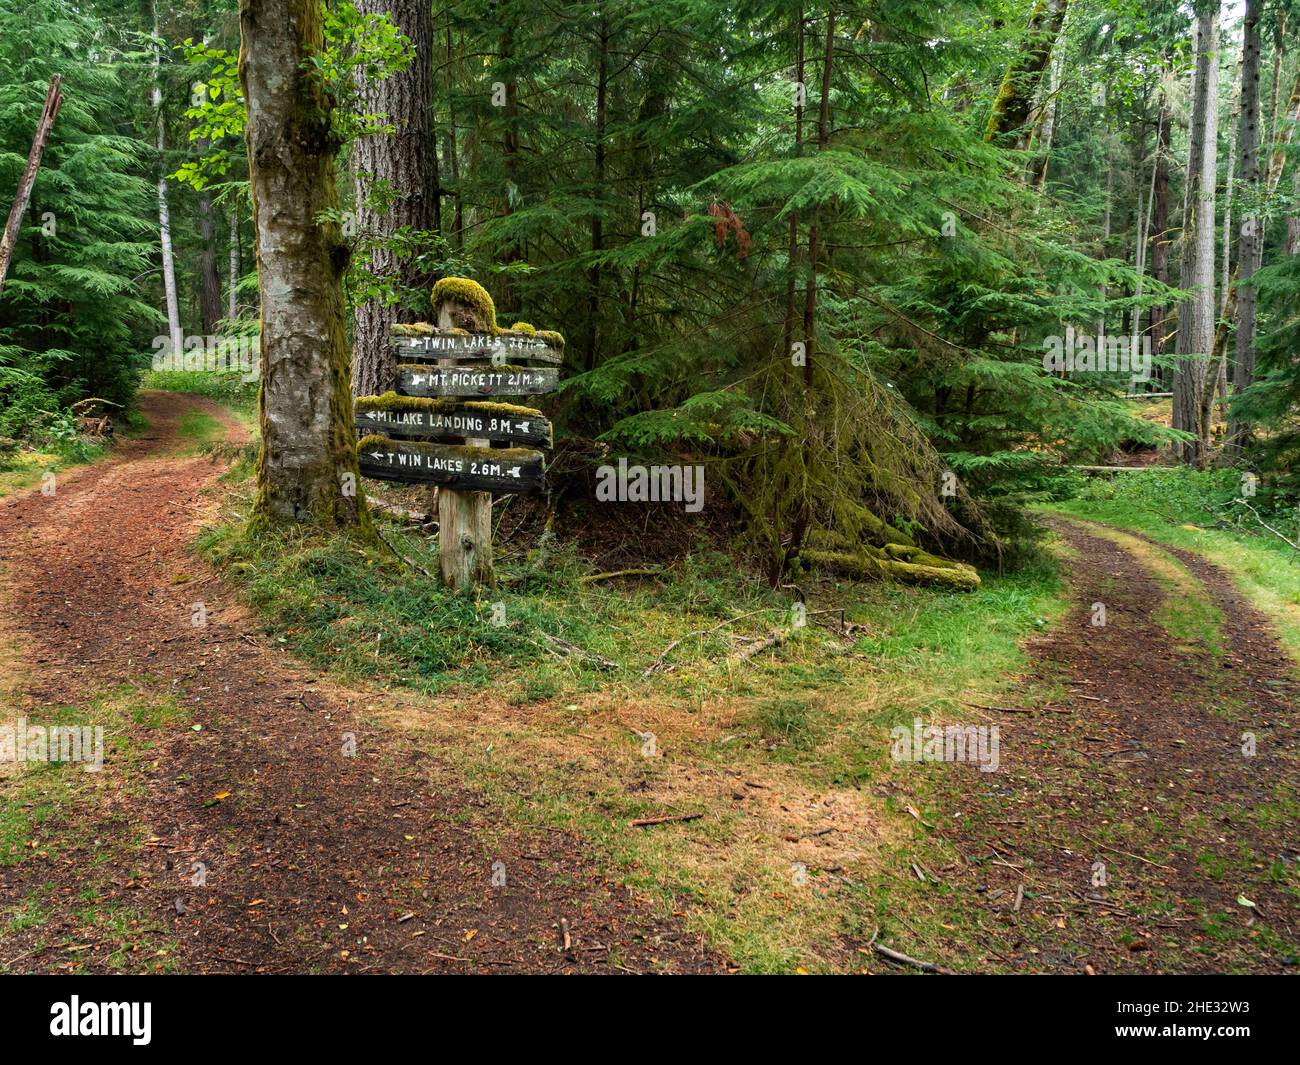 WA21031-00...WASHINGTON - Intersection of two old forest roads now serving as hiking and biking trails in Moran State Park on Orcas Island. Stock Photo